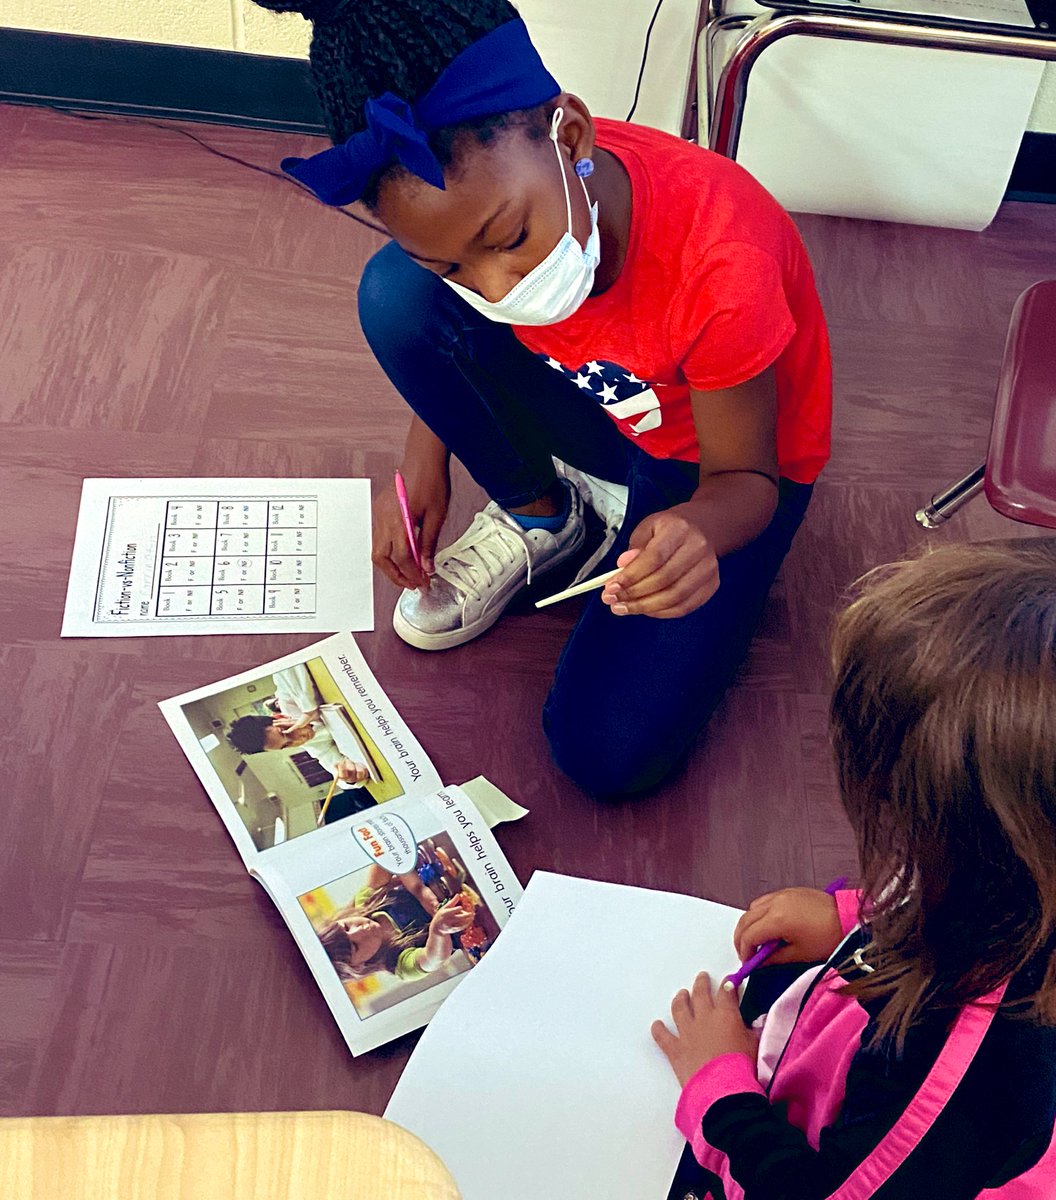 If I had to give this post a name, it would be “books and bows”! What’s really going on here is these 1st graders were determining if their books were fiction or non fiction - and they did an awesome job! @RCE_HCS #fueledbyenthusiasm #teamwork